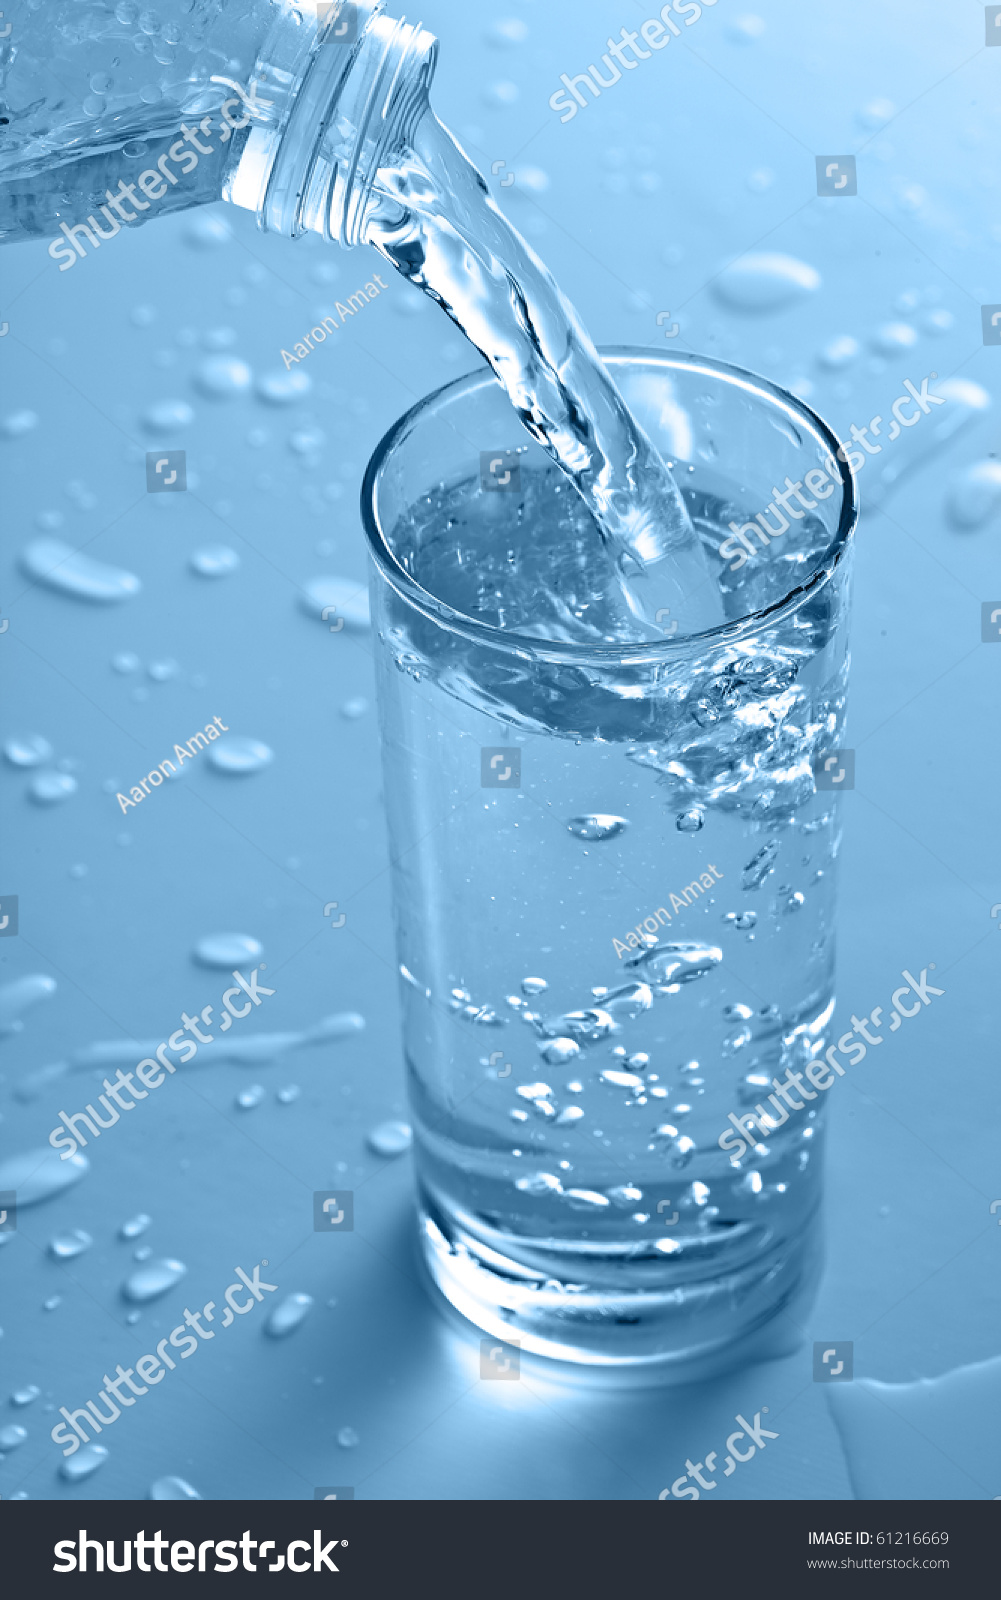 Bottle Pouring Water On Glass Stock Photo 61216669 - Shutterstock